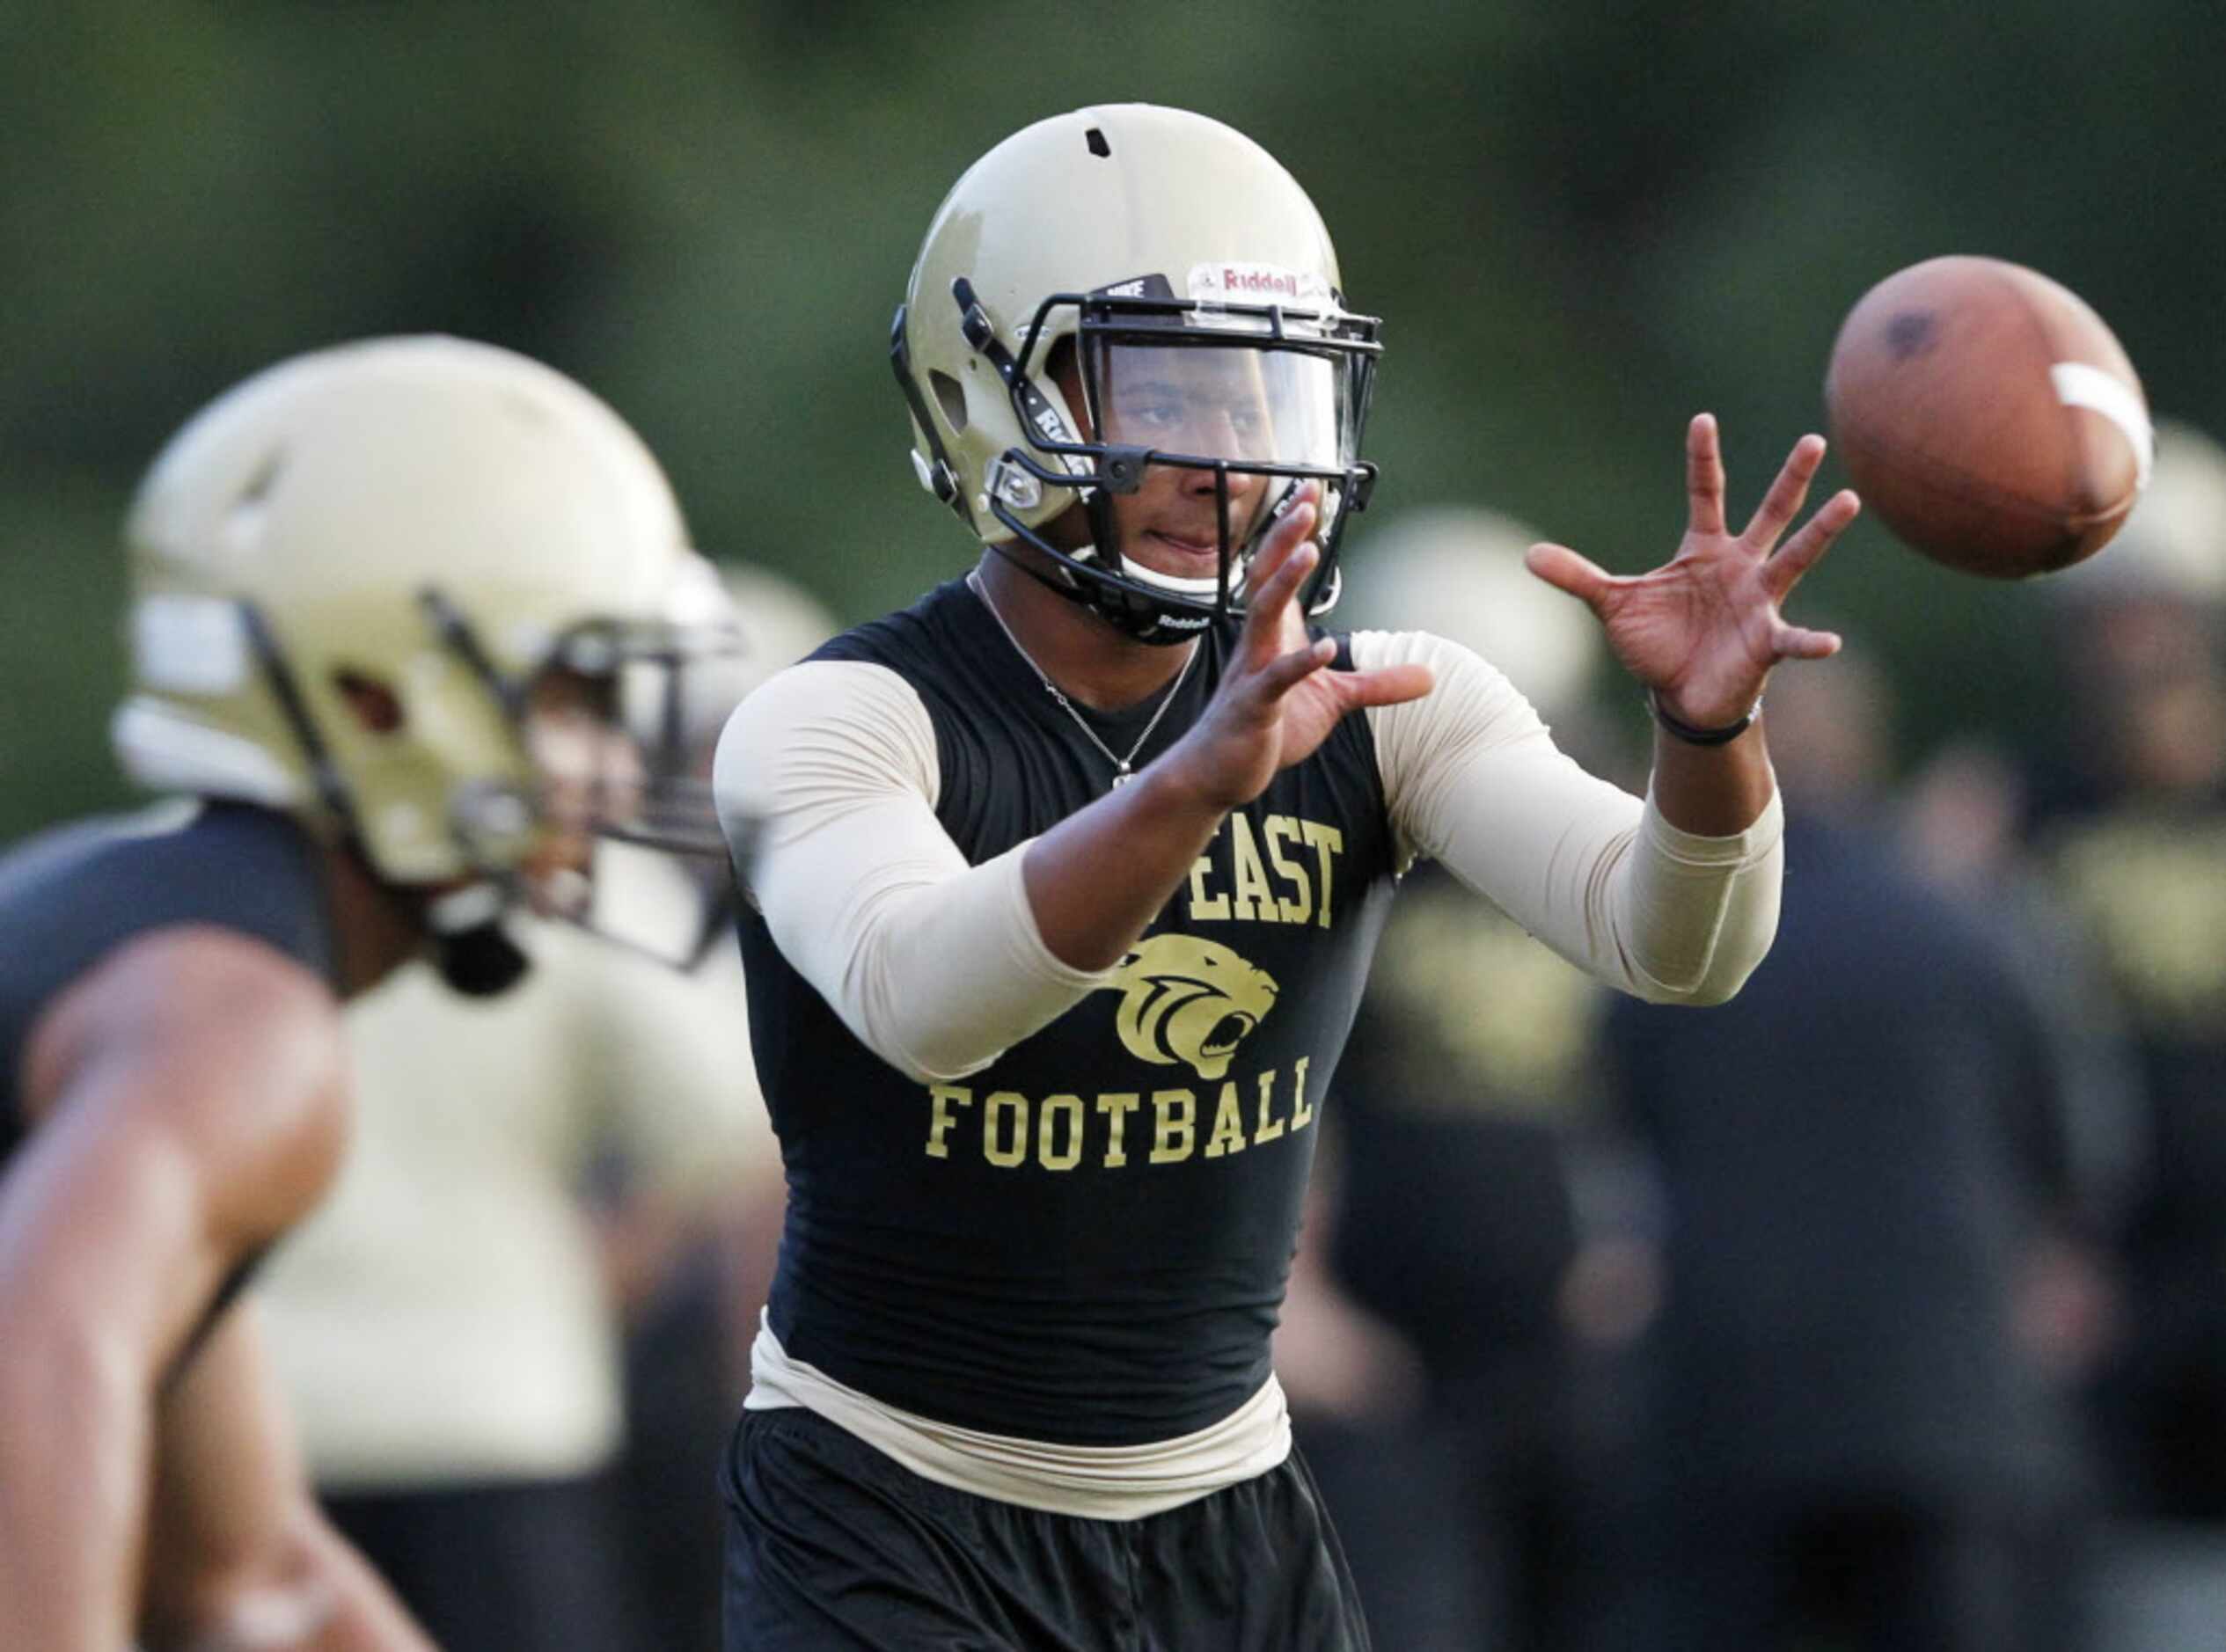 Plano East's quarterback Miles Thompson prepares to catch the ball at the start of a play...